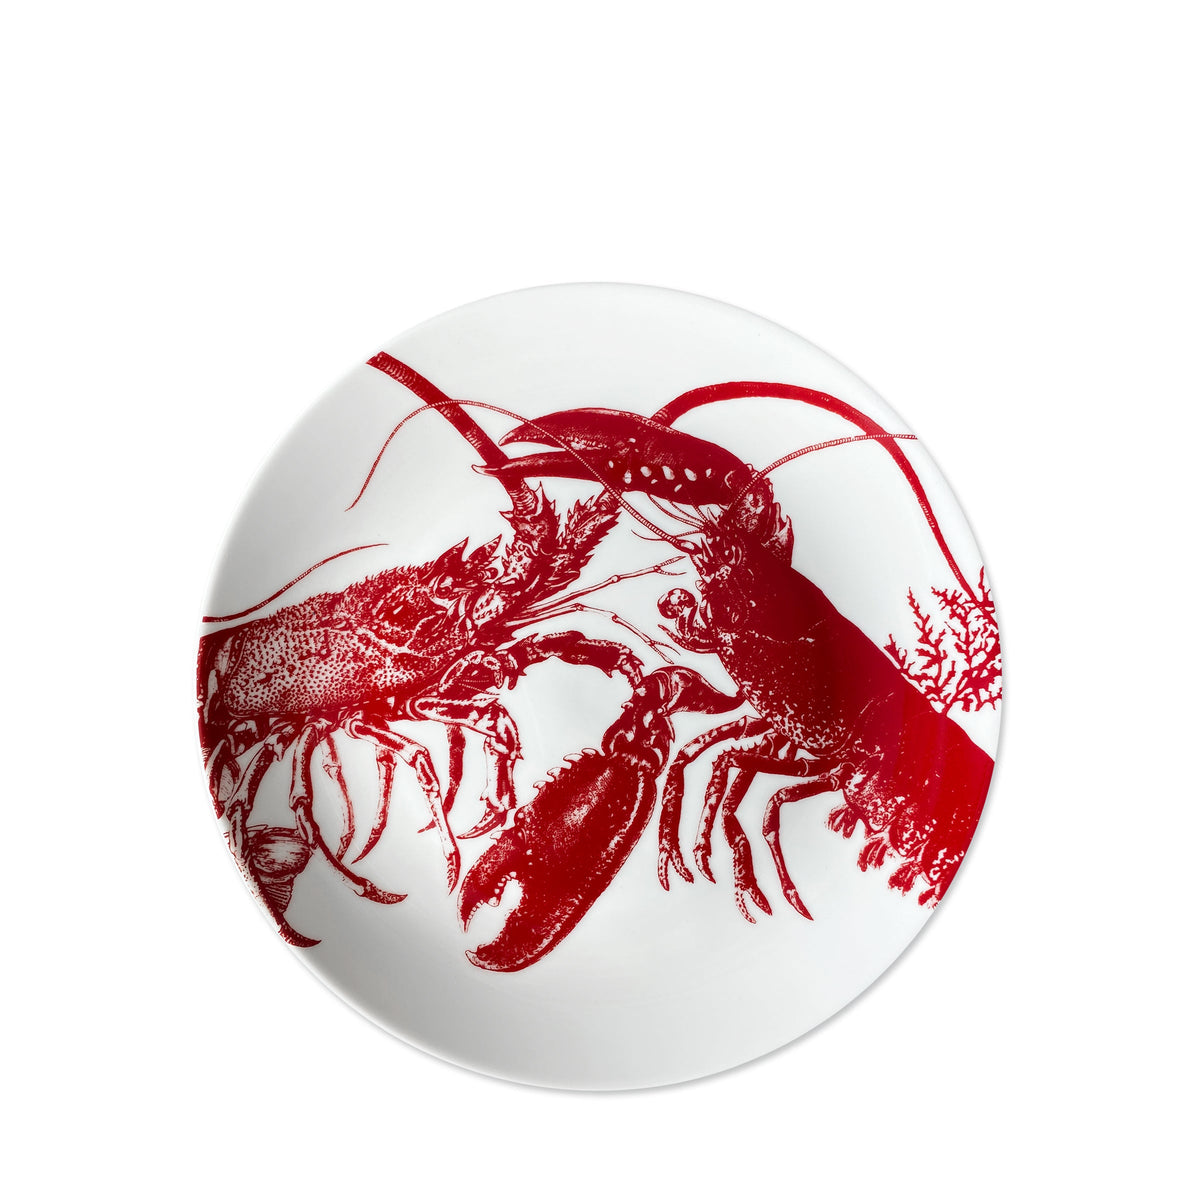 A summer-ready Lobster Starter Set from the Caskata Lobster Collection, featuring a red lobster design, microwave and dishwasher safe.